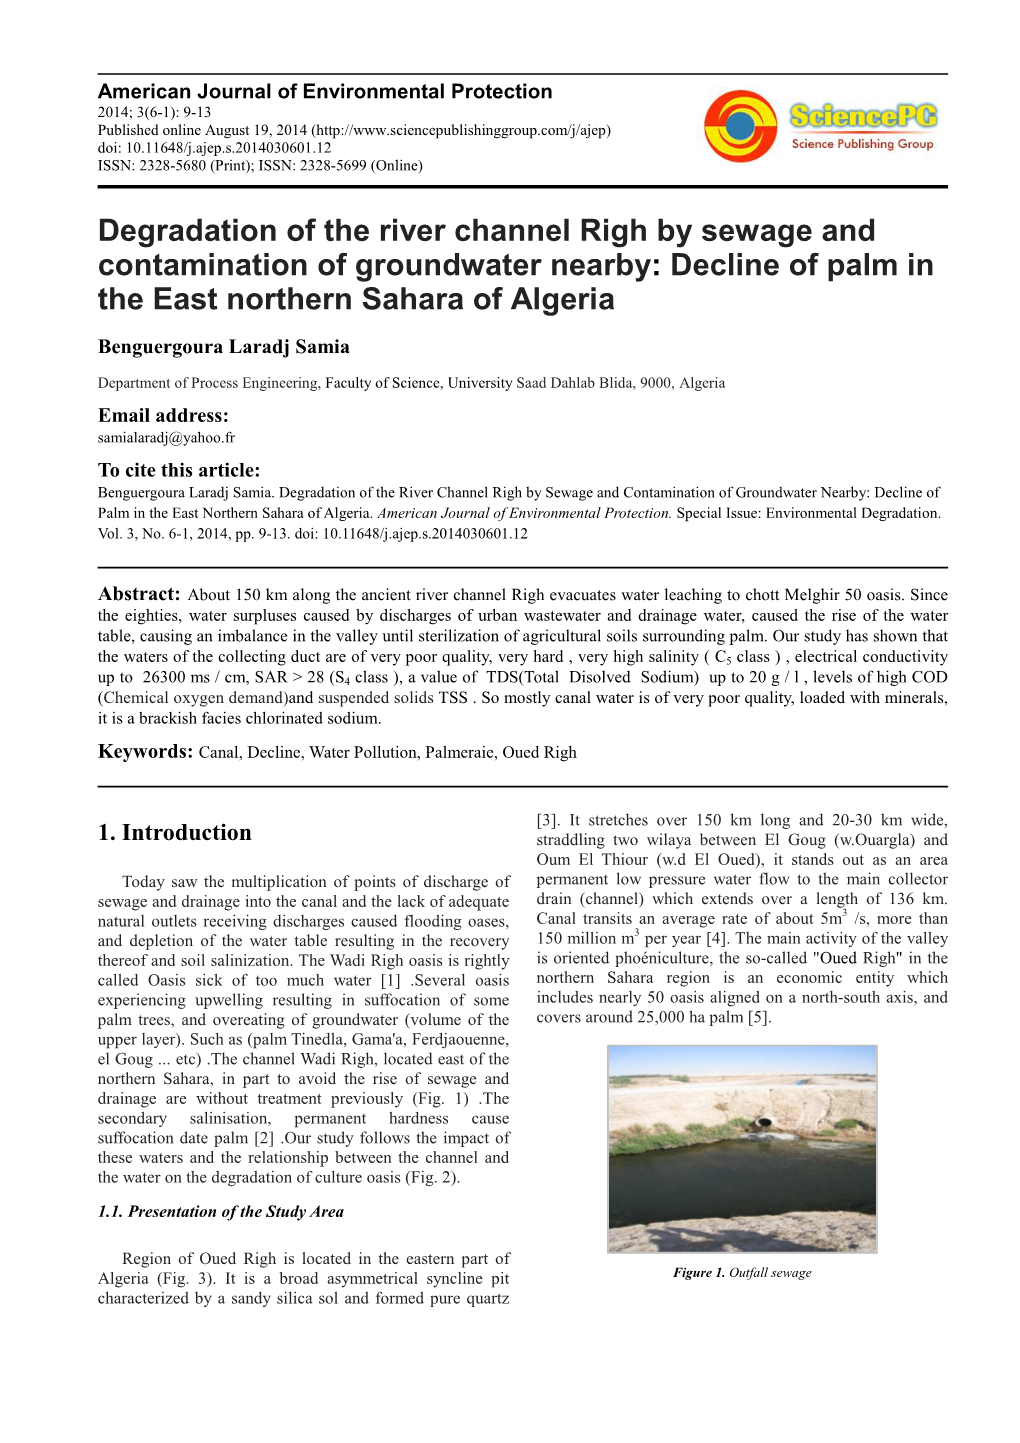 Degradation of the River Channel Righ by Sewage and Contamination of Groundwater Nearby : Decline of Palm in the East Northern Sahara of Algeria